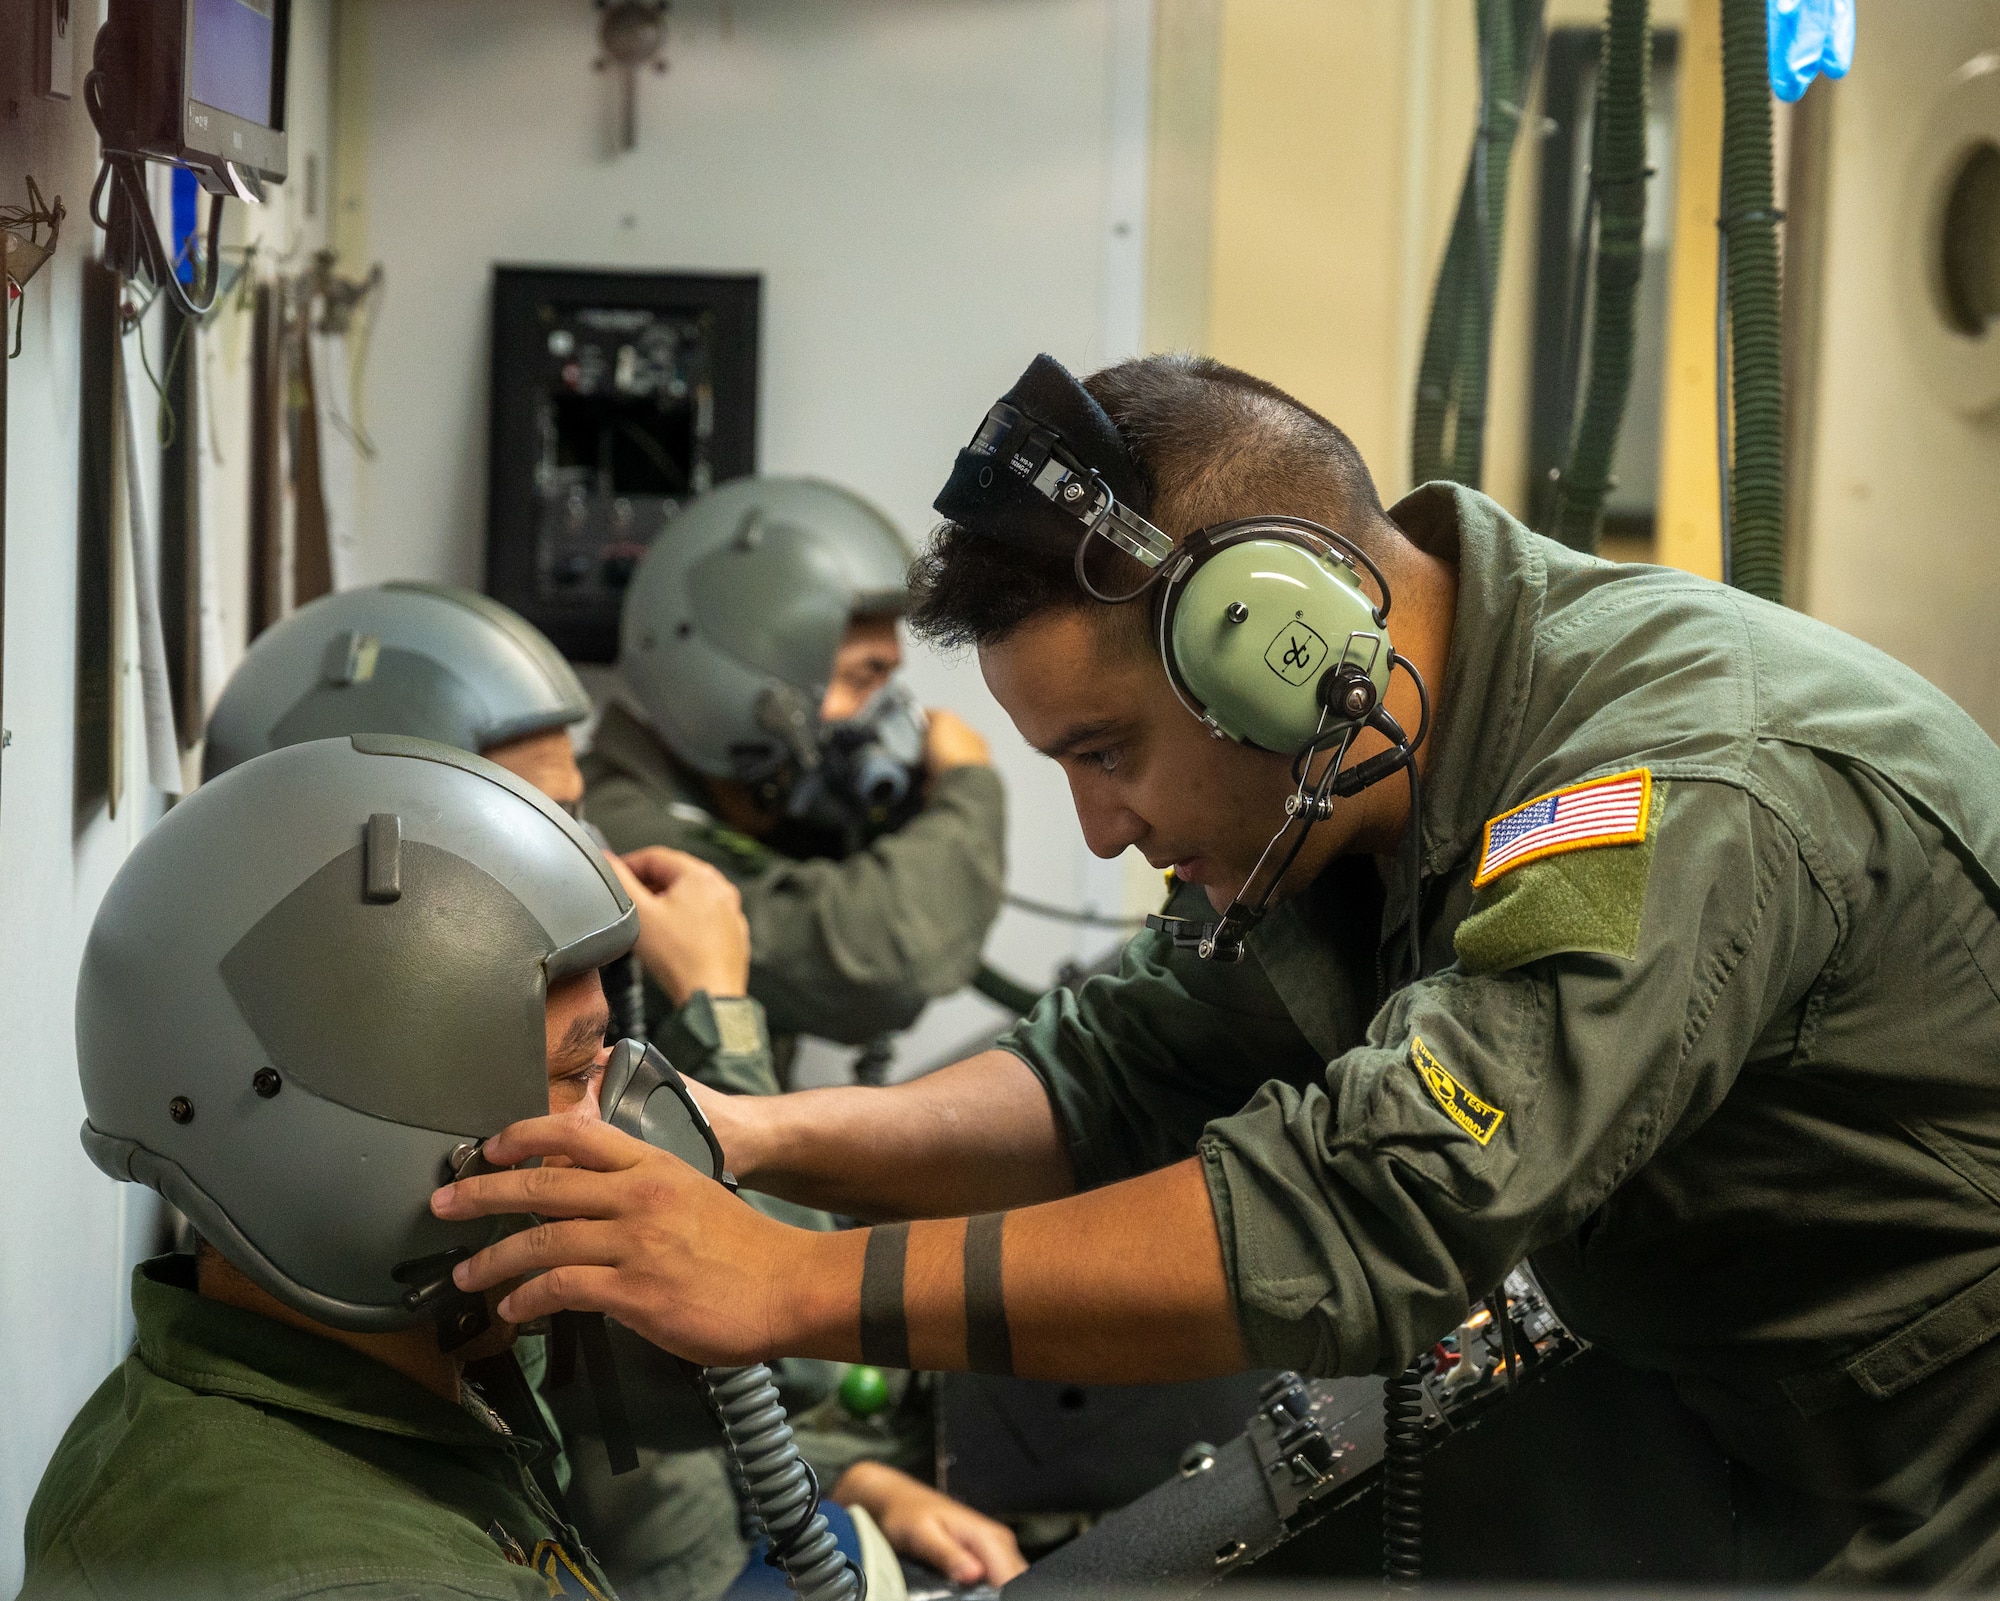 U.S. Air Force Senior Airman Erik Palaca, a 47th Operations Support Squadron aerospace physiology technician, prepares a pilot's oxygen mask for the altitude chamber at Laughlin Air Force Base, Texas, Aug. 14, 2023. A pilot's oxygen mask must have a good seal before going up to altitude, ensuring they receive enough air to maintain consciousness. (U.S. Air Force photo by Senior Airman Nicholas Larsen)